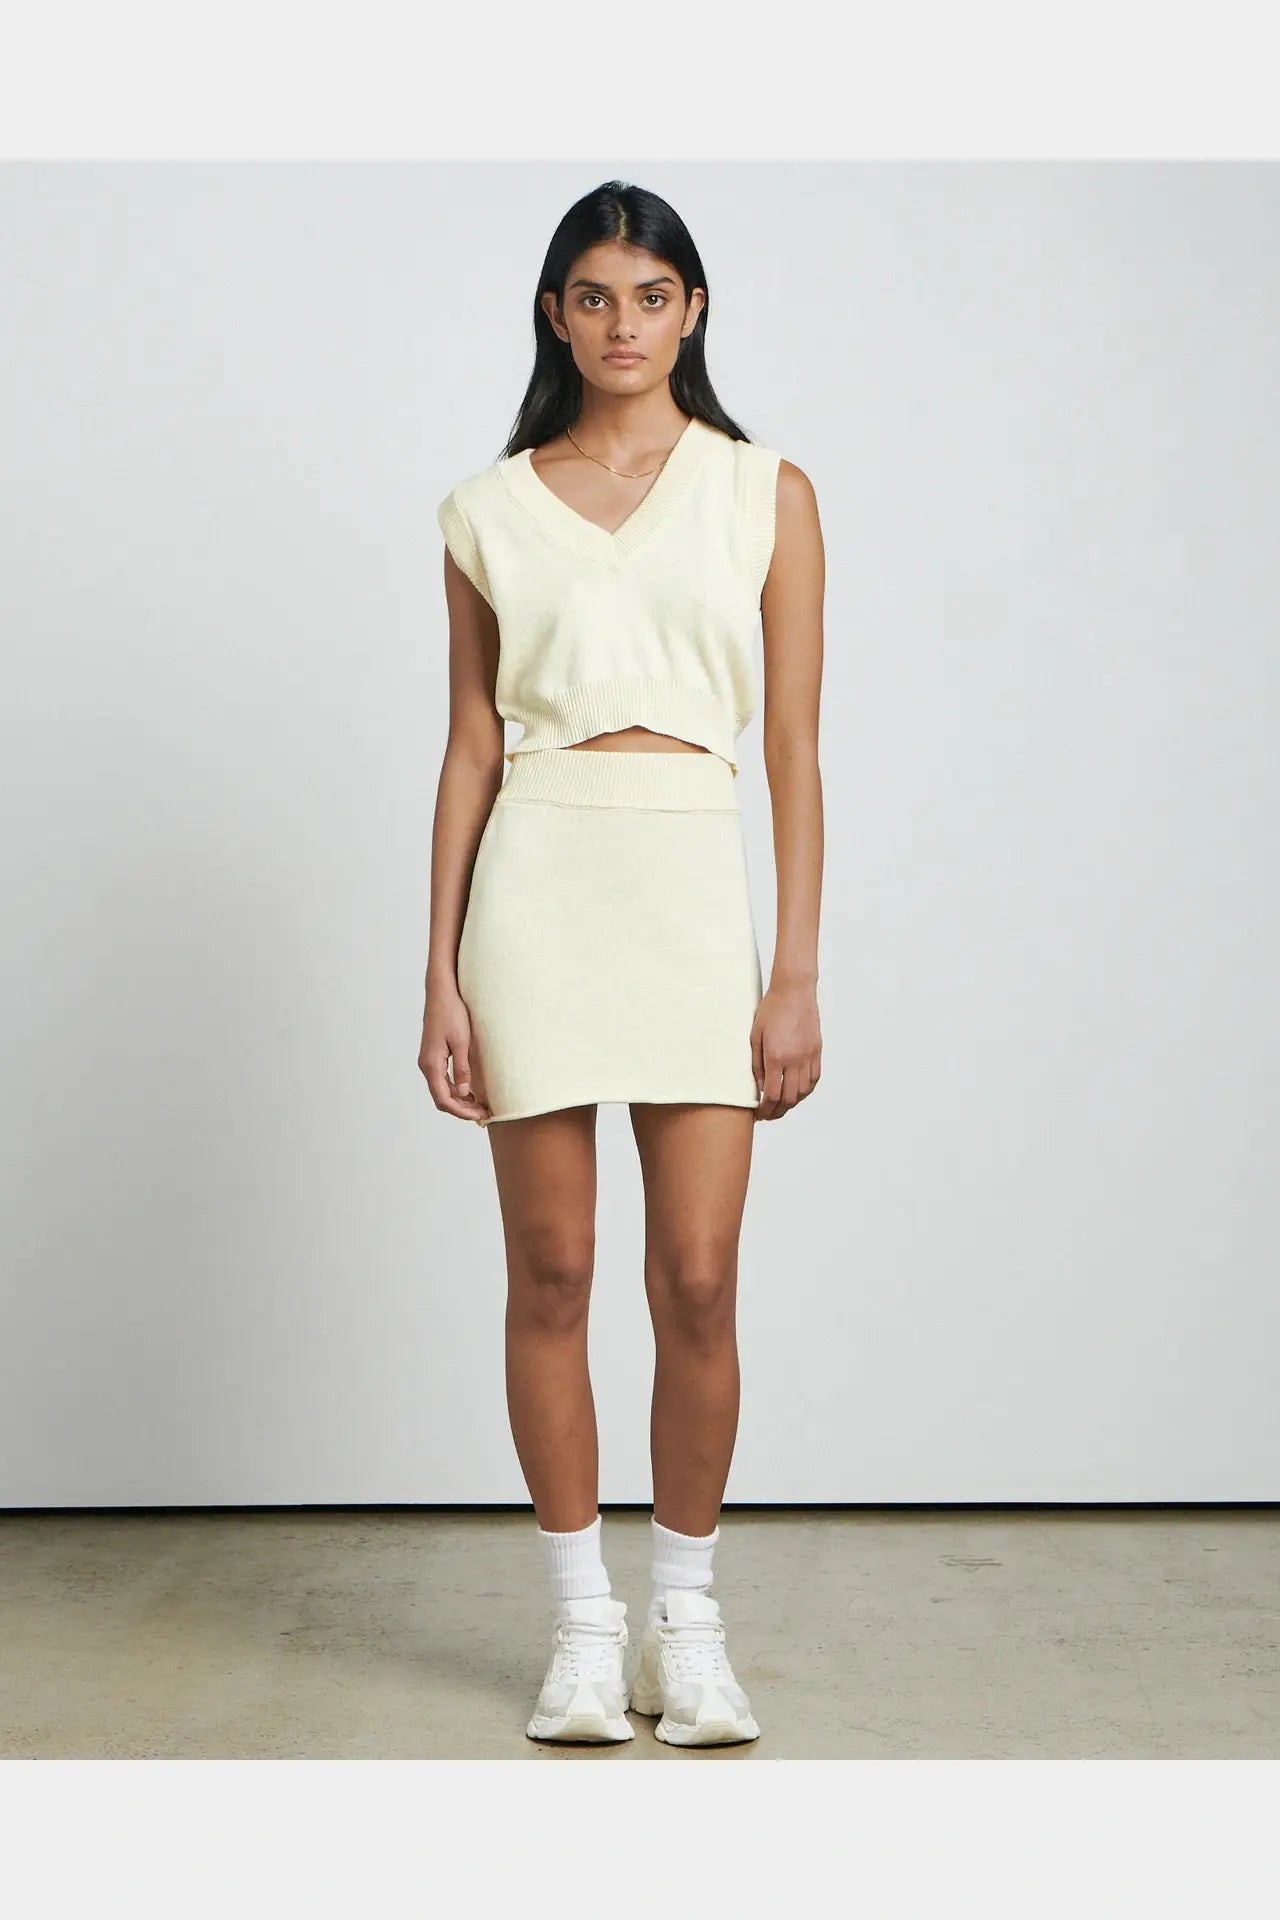 Charlie holiday bare knitted mini skirt- butter